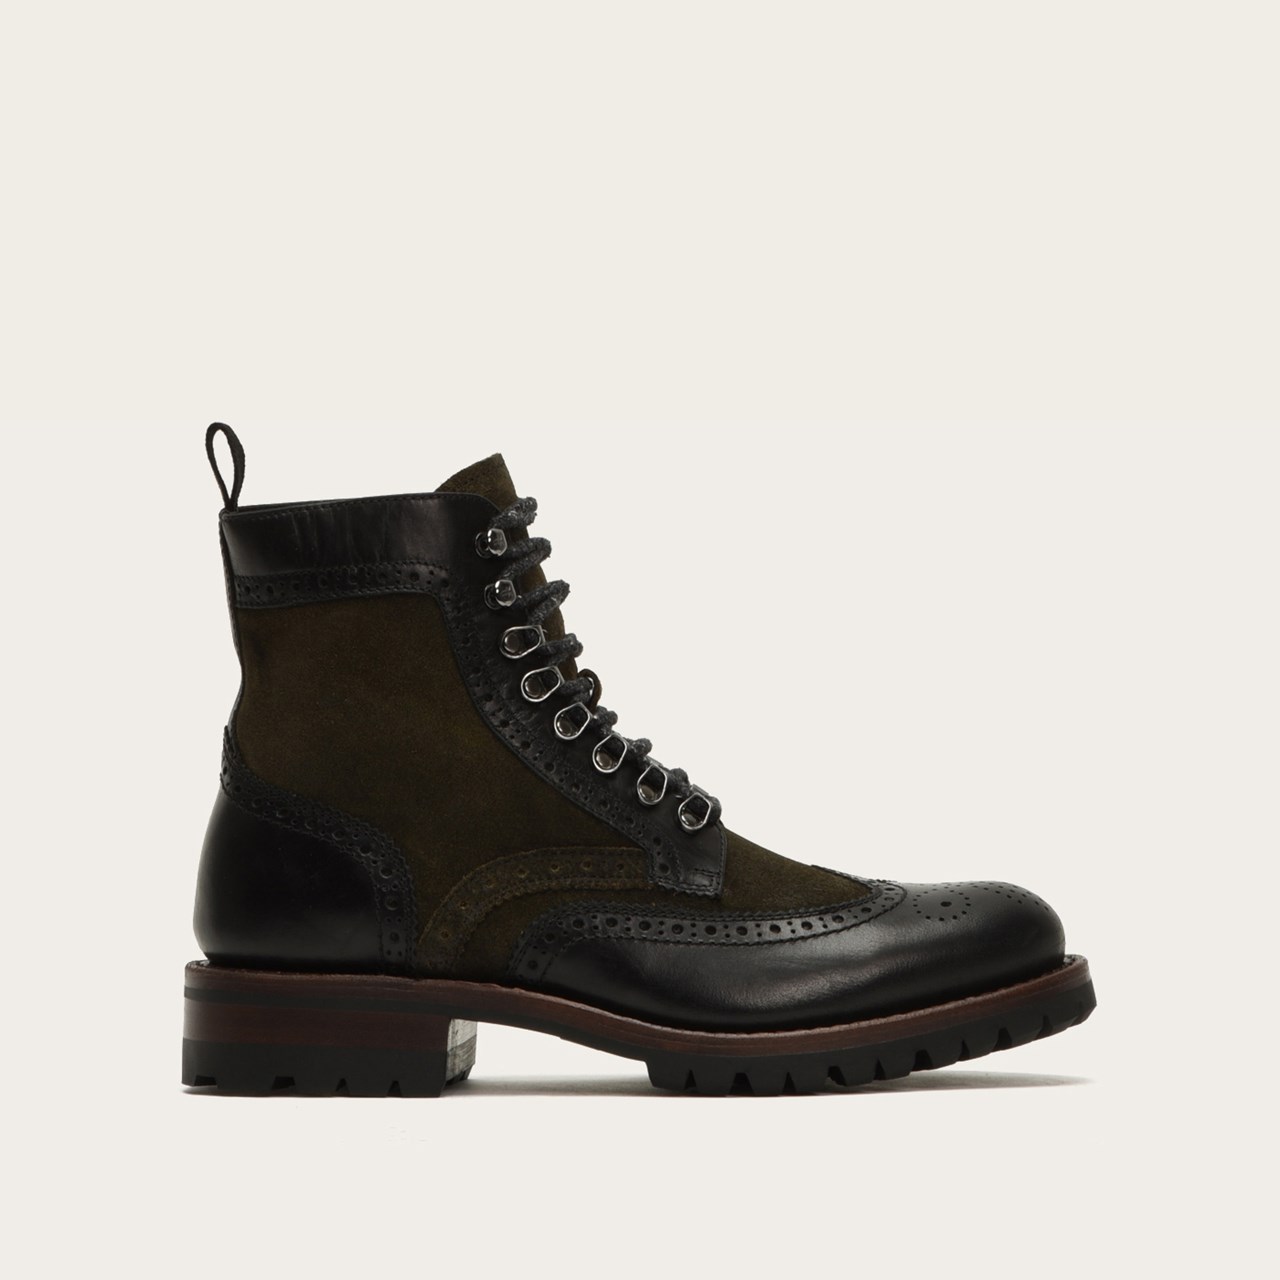 10 Great Boots to Wear This Fall and Winter - Maxim